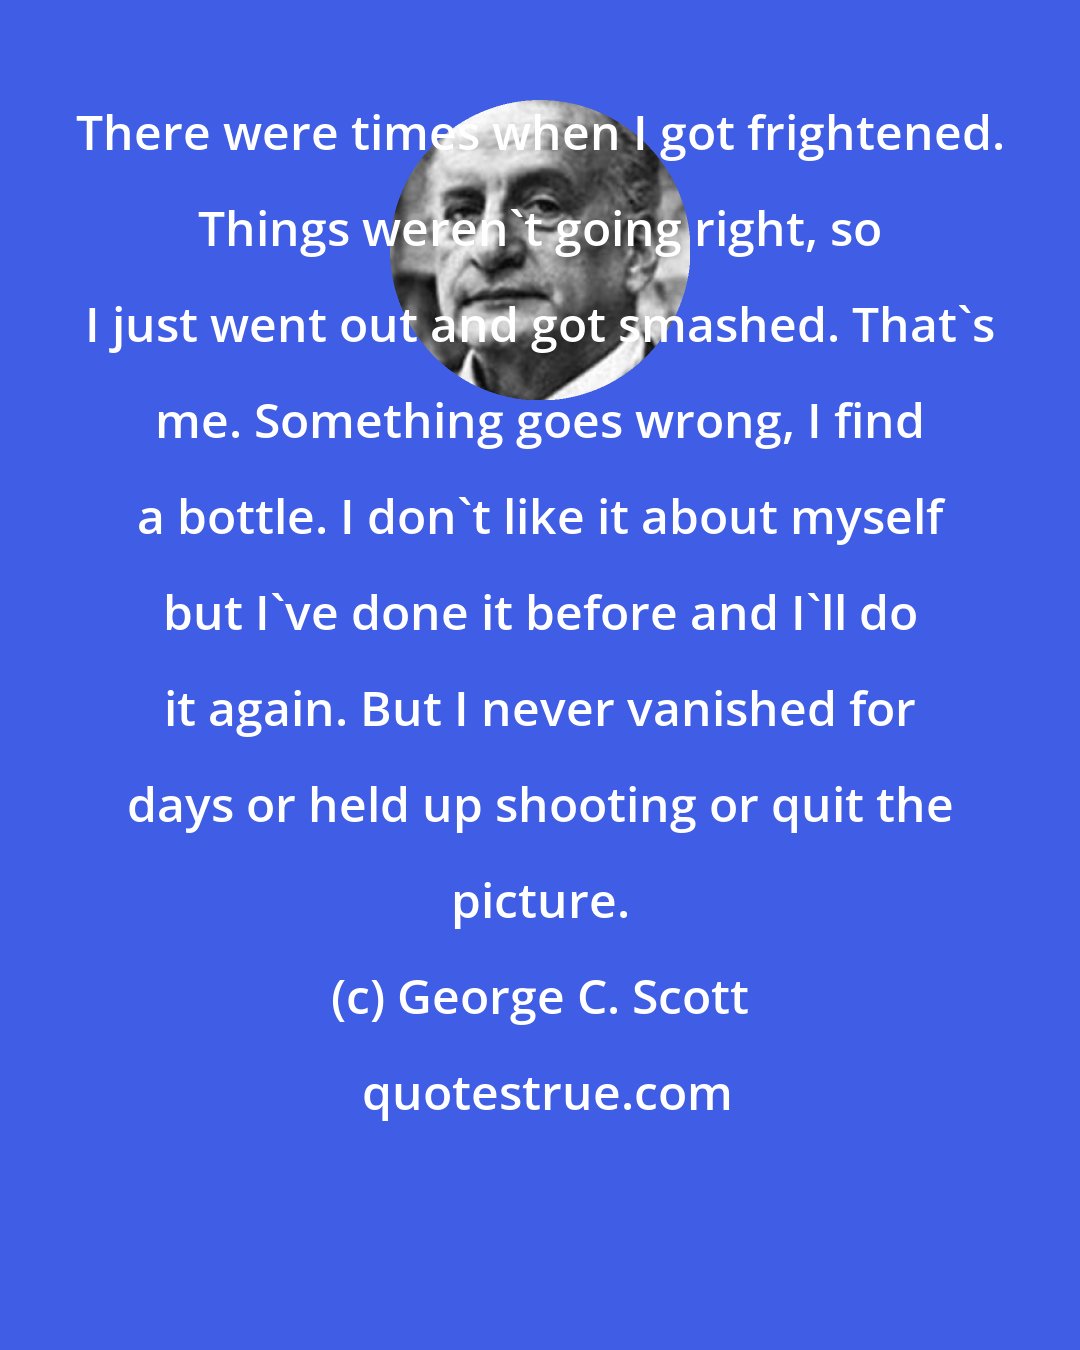 George C. Scott: There were times when I got frightened. Things weren't going right, so I just went out and got smashed. That's me. Something goes wrong, I find a bottle. I don't like it about myself but I've done it before and I'll do it again. But I never vanished for days or held up shooting or quit the picture.